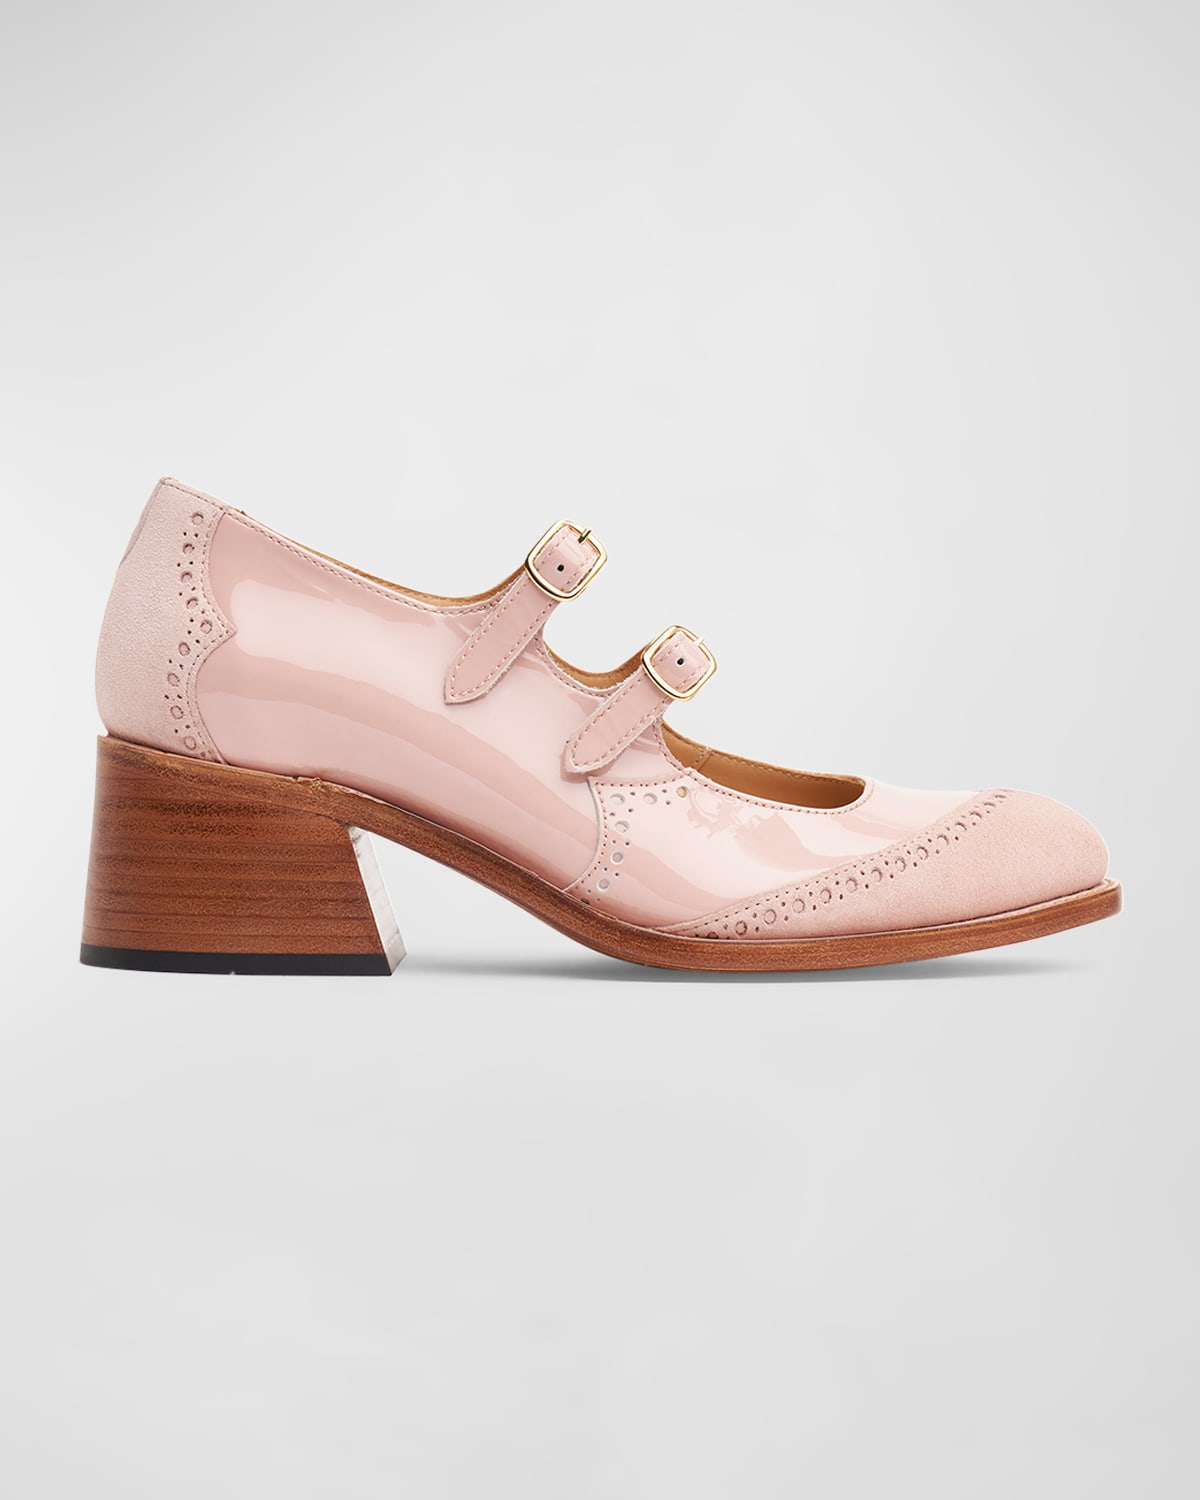 Shop The Office Of Angela Scott Miss Amlie Mixed Leather Mary Jane Pumps In Mochi